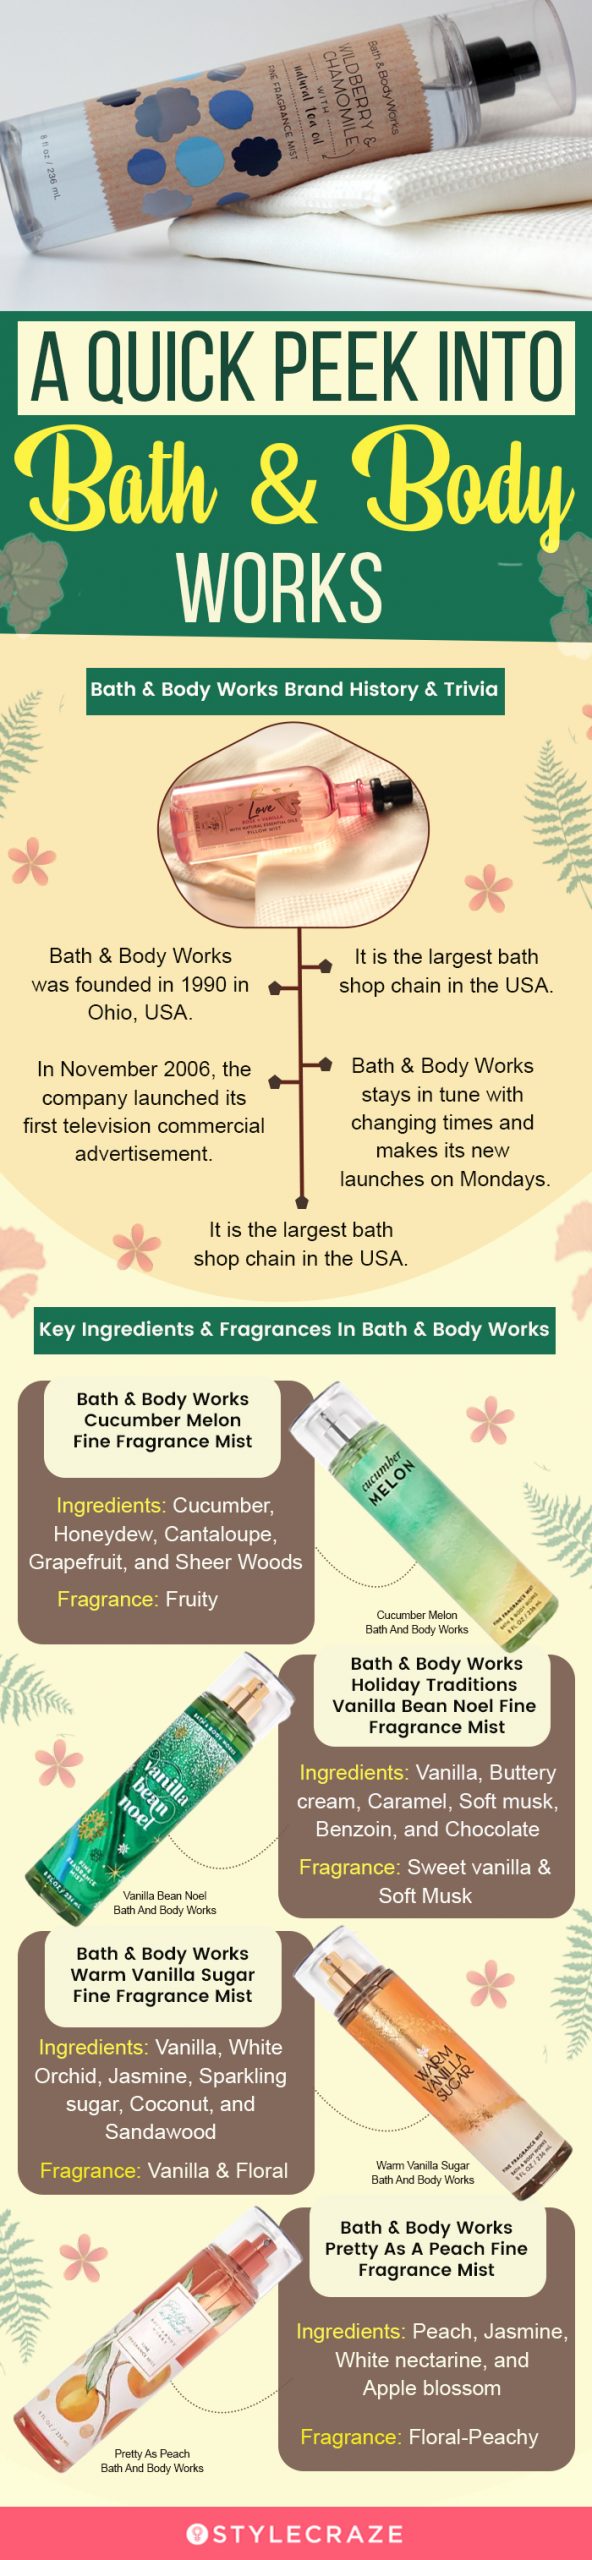 A Quick Peek Into Bath & Body Works [infographic]